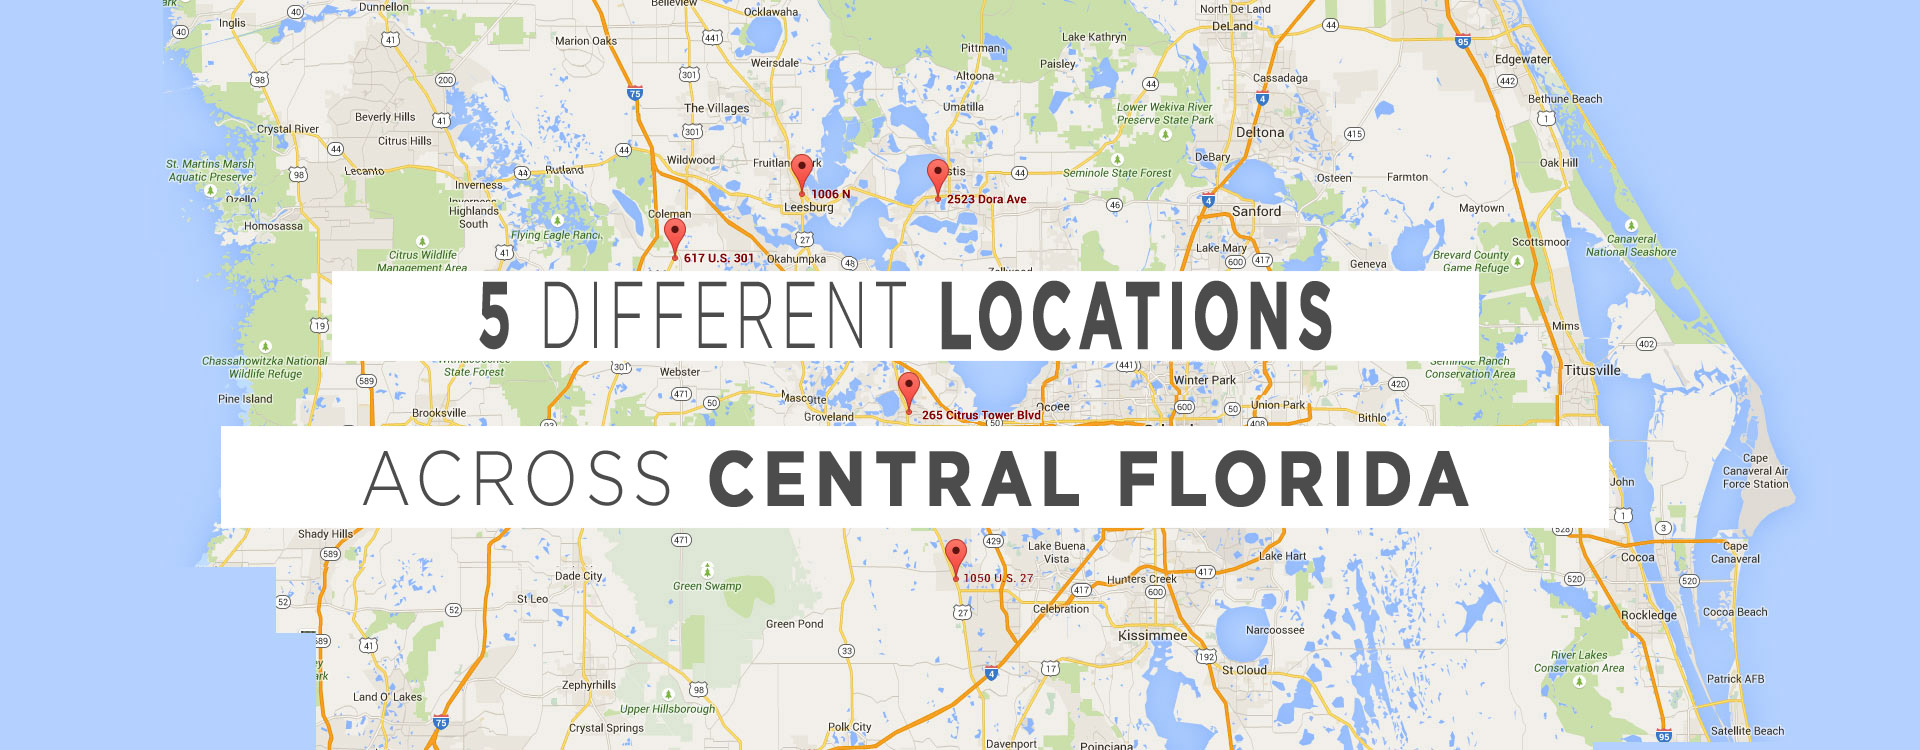 5 different locations across central florida